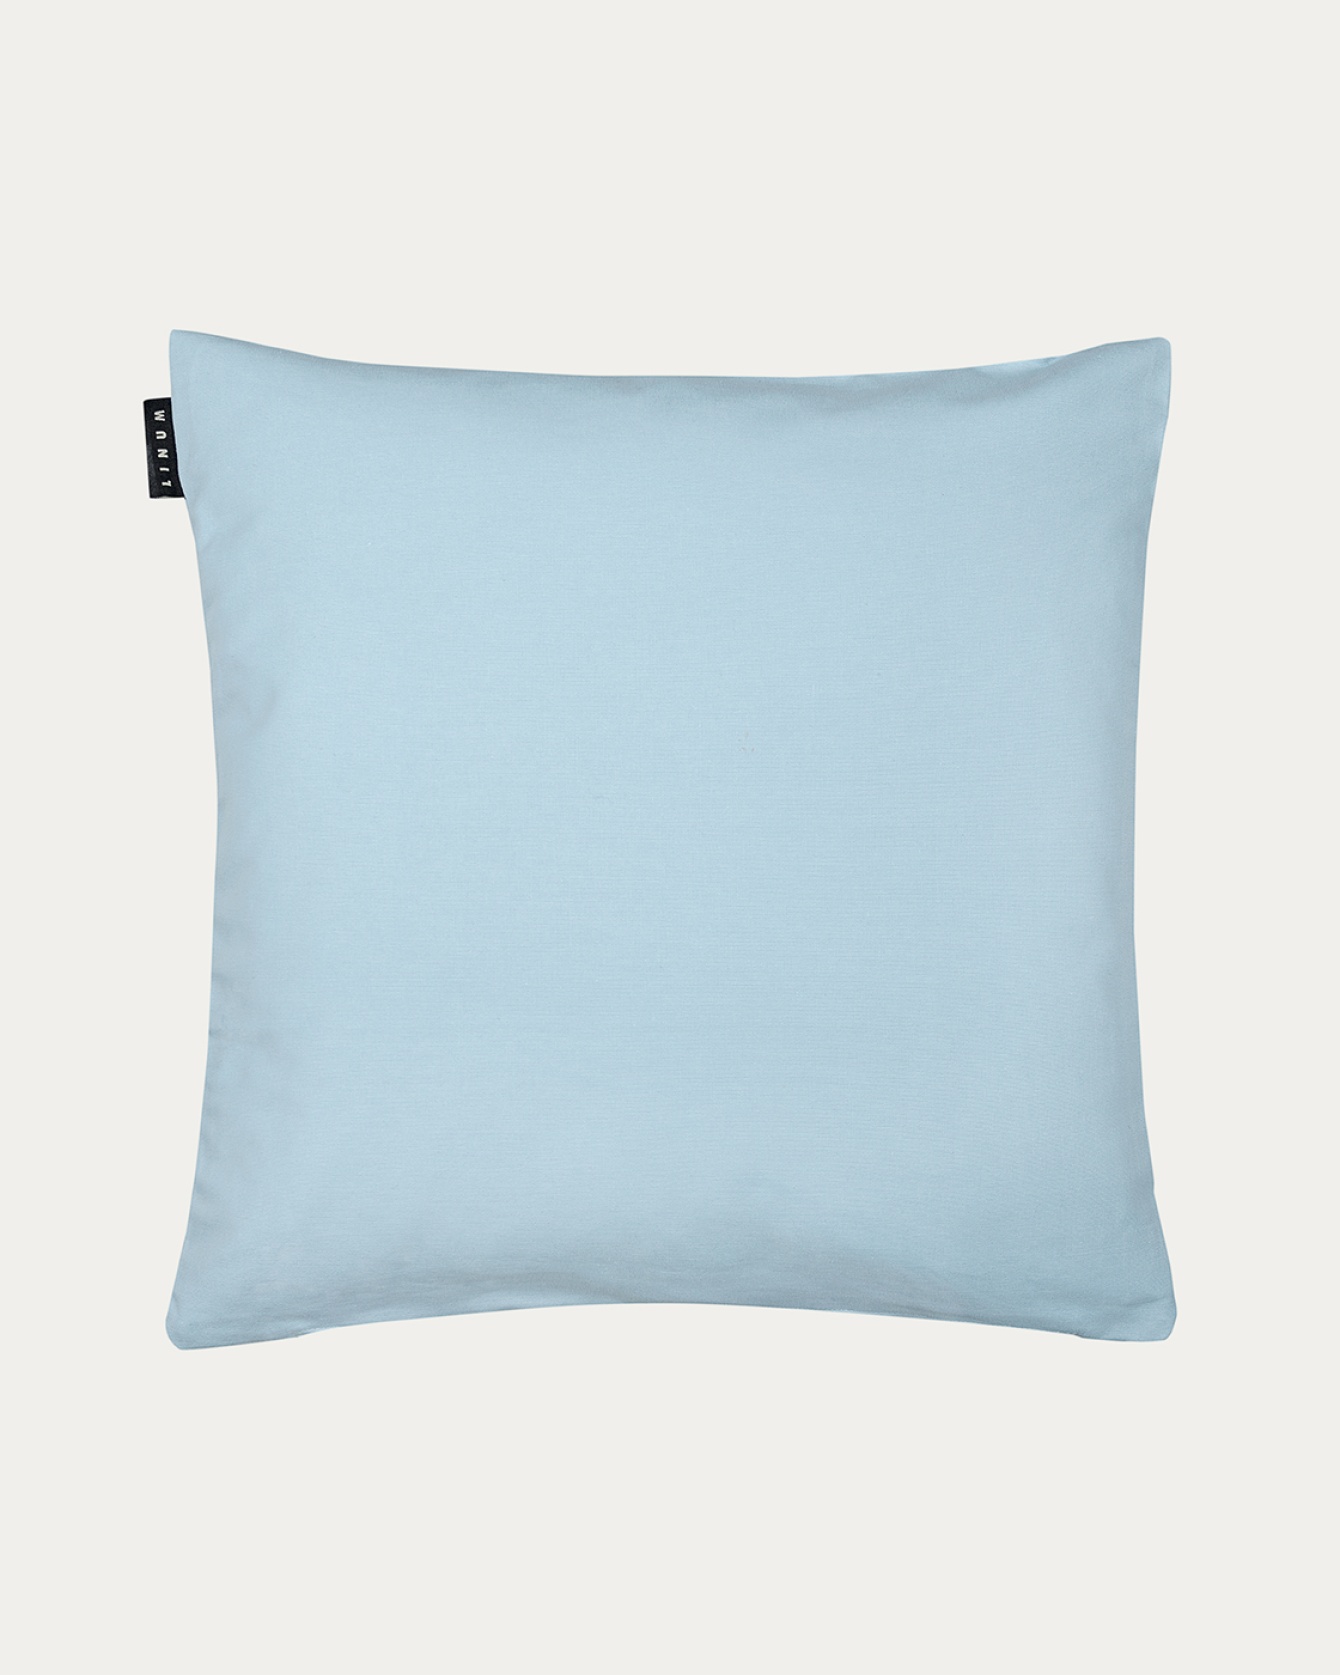 Product image light grey blue ANNABELL cushion cover made of soft cotton from LINUM DESIGN. Size 50x50 cm.